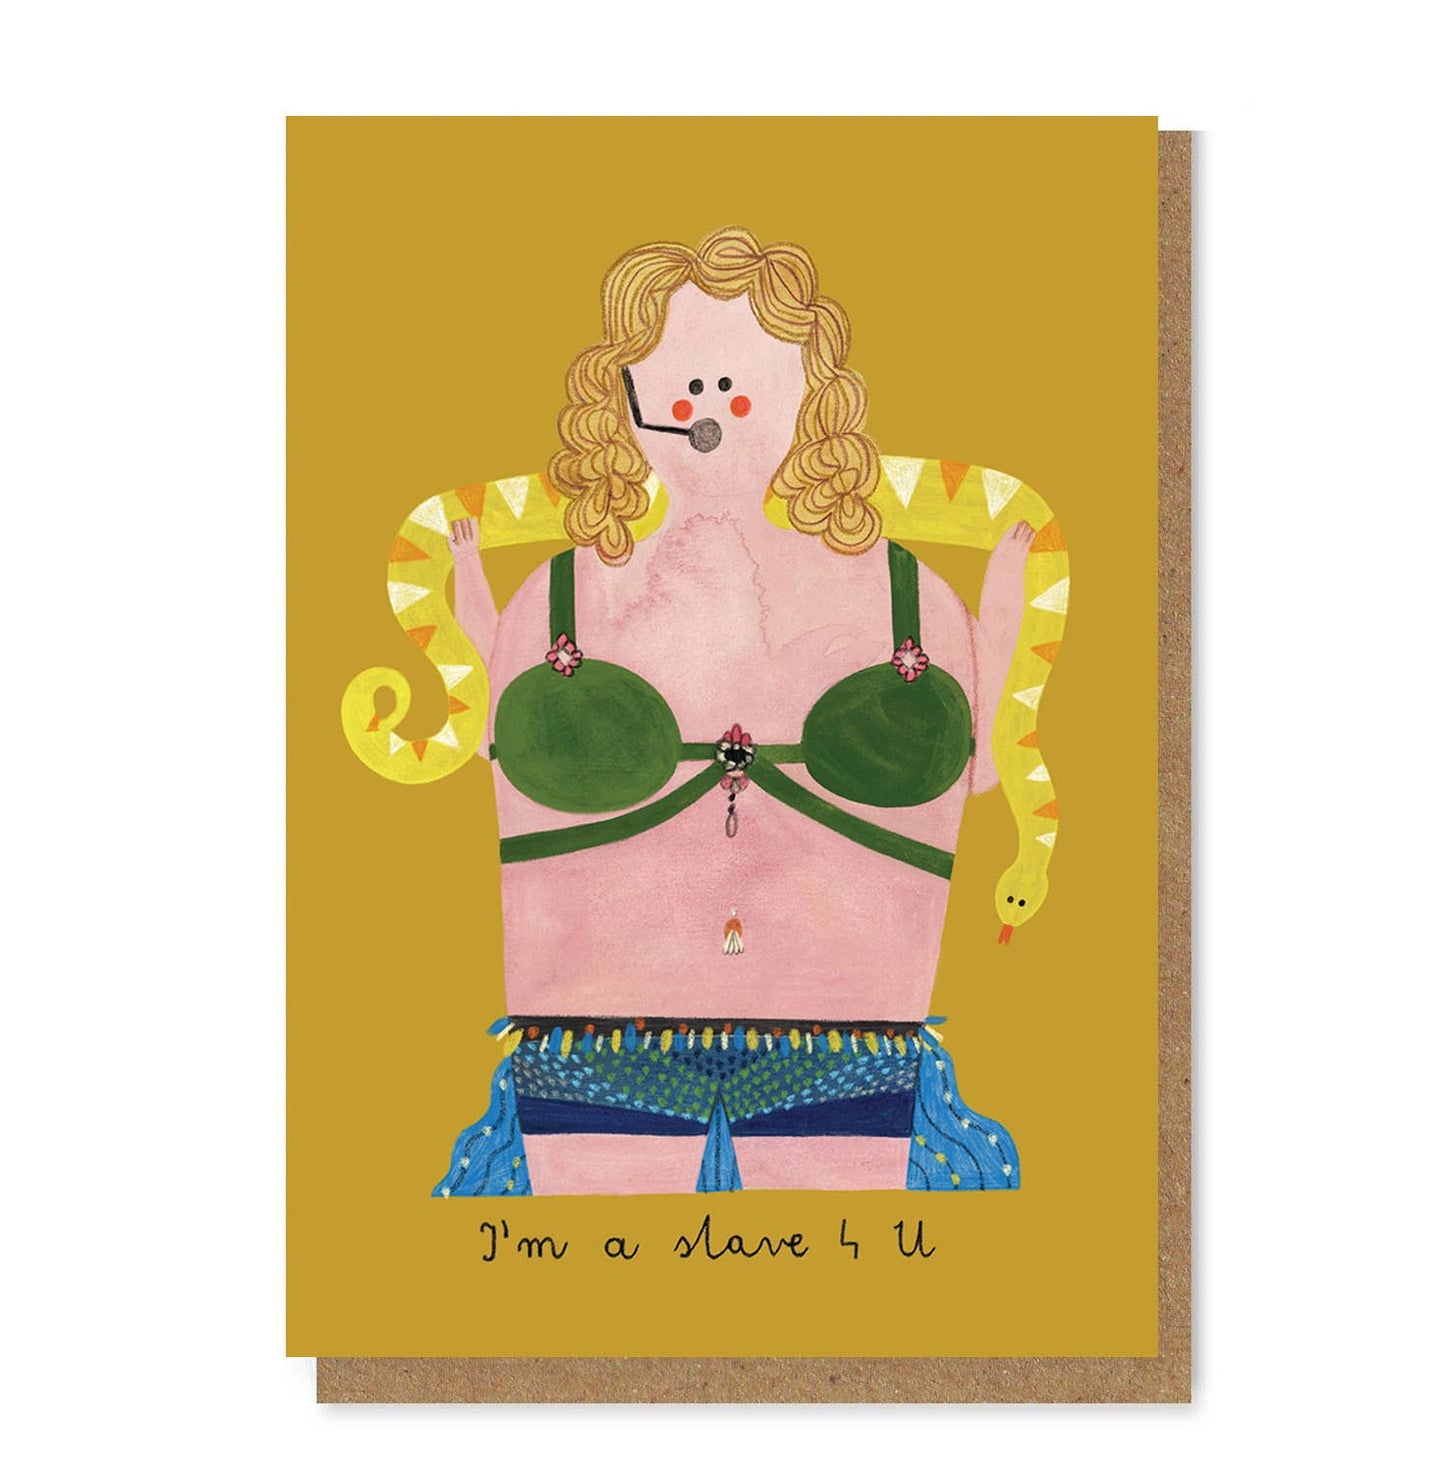 Britney Spears 'slave 4 you' Card